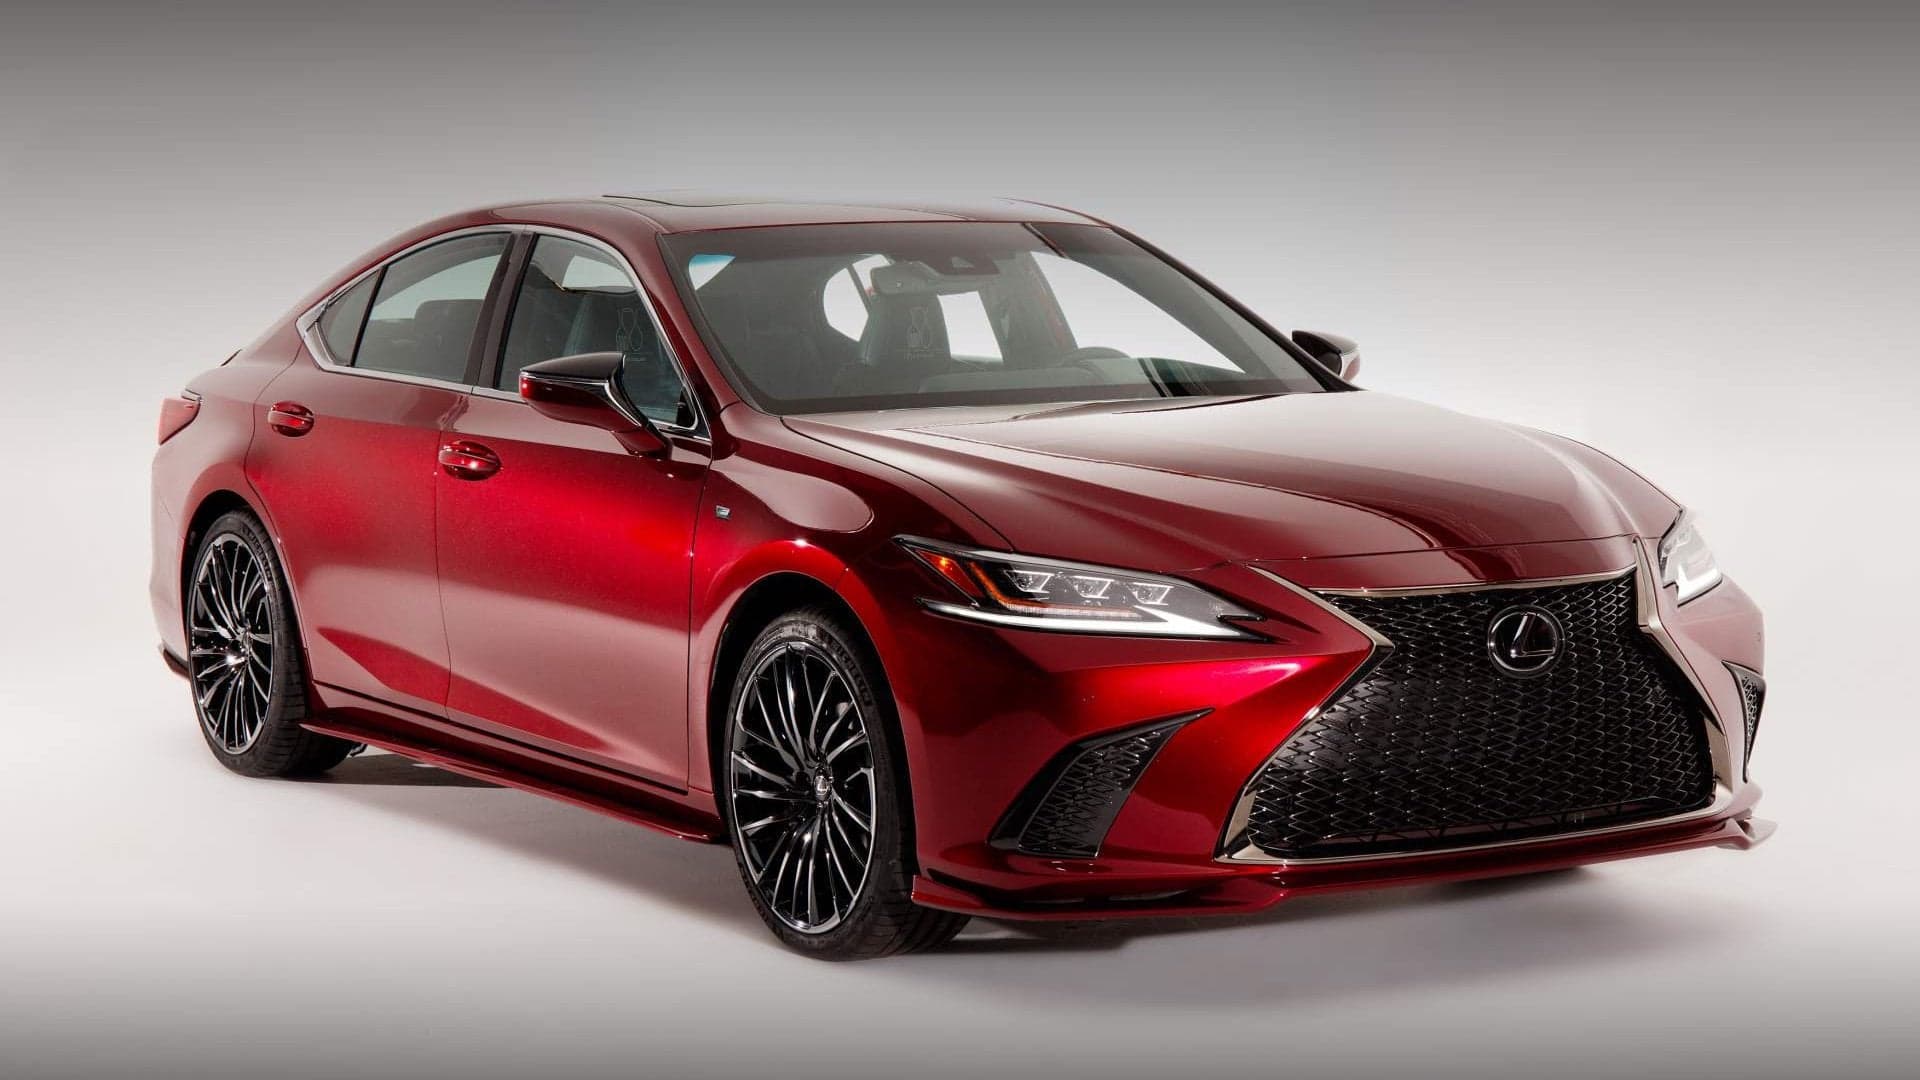 2019 Lexus ES 350 Shows up at SEMA 2018 With Full Wine Cooler in Its Trunk